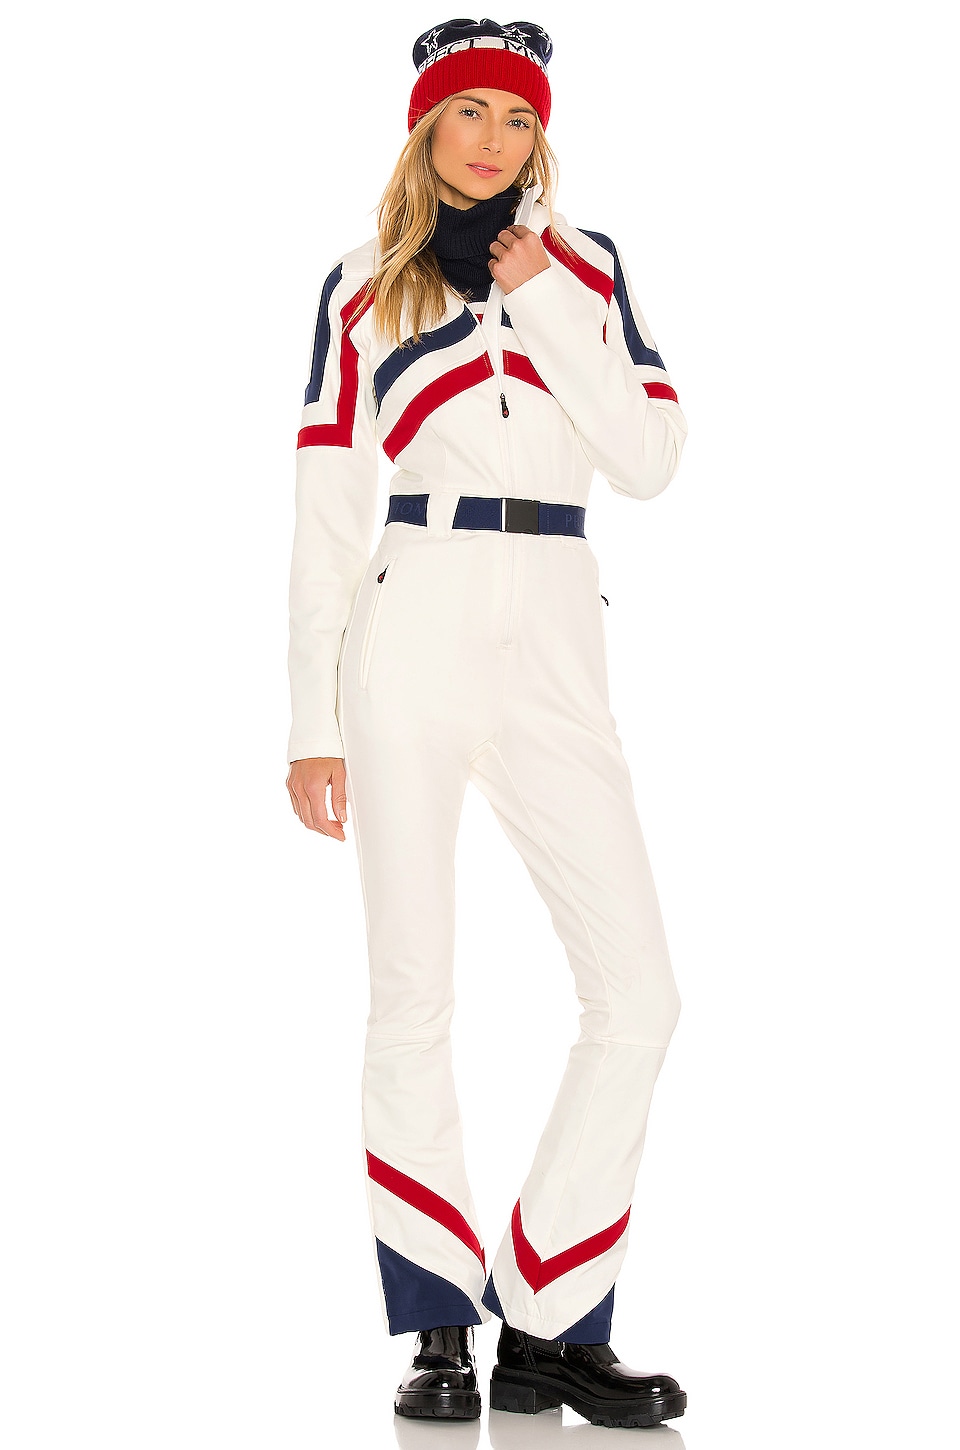 Perfect Moment Tignes Jumpsuit in Snow White, Navy & Red